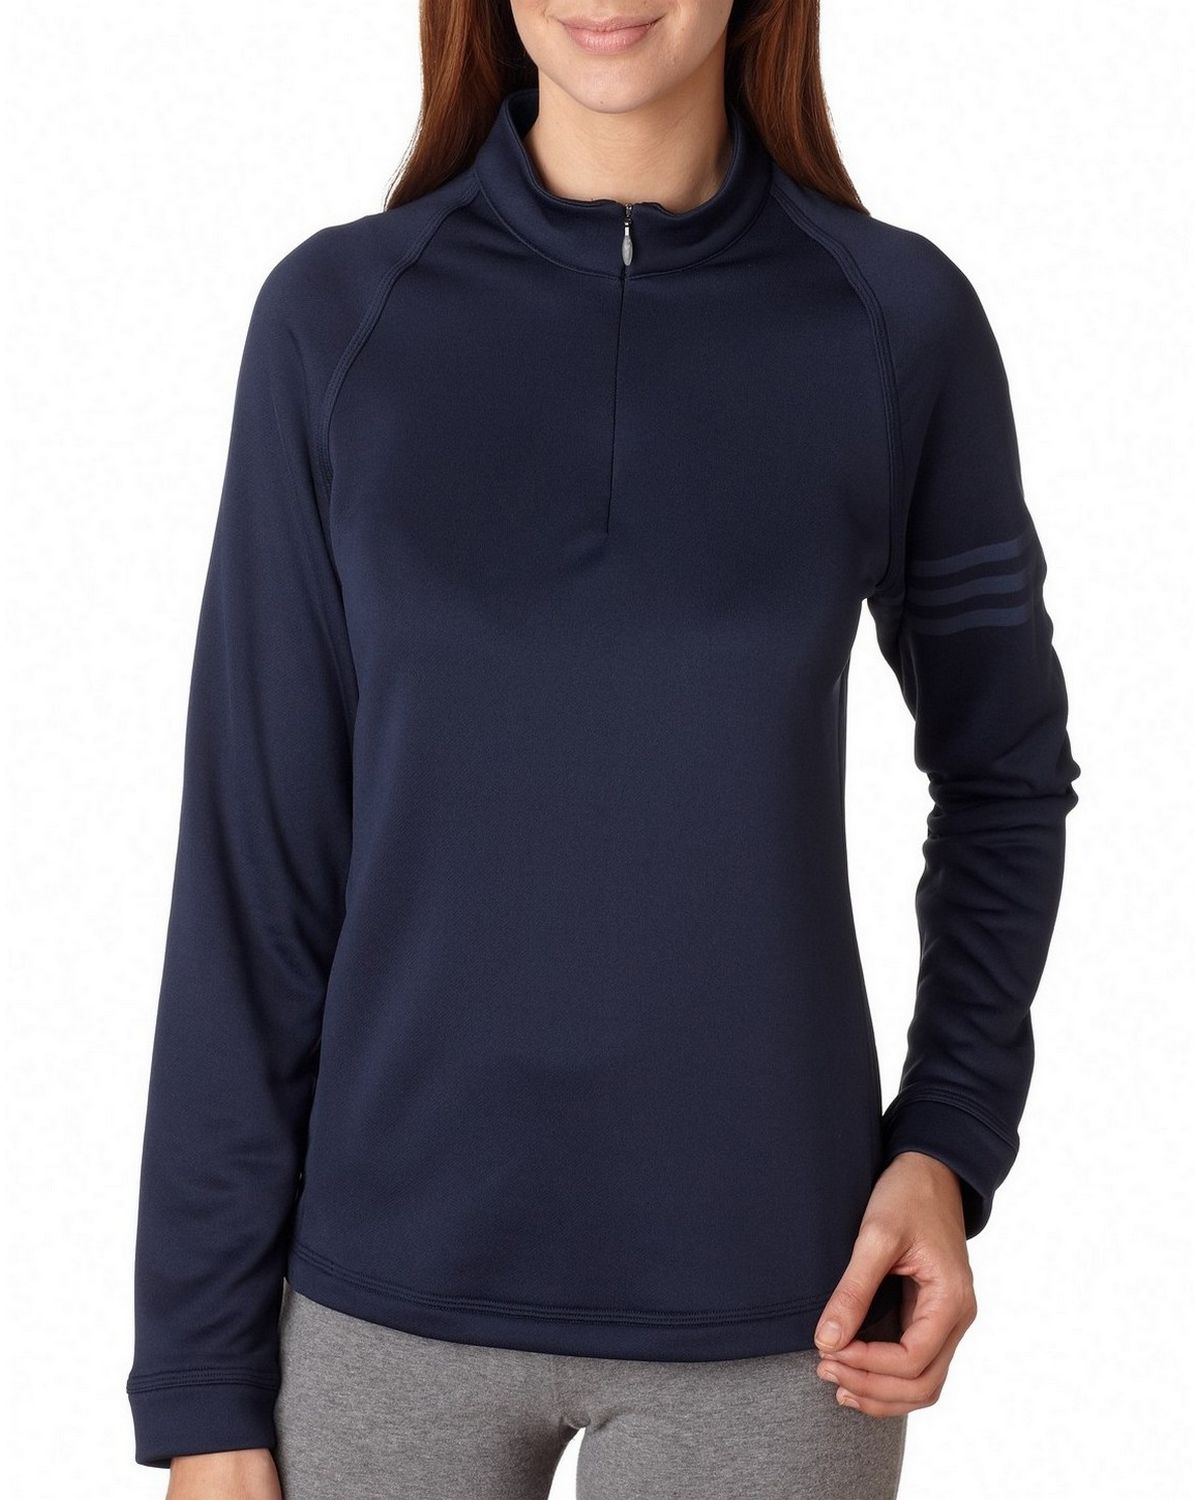 Adidas A175 Women's Performance 1/2 Zip Training Pullover